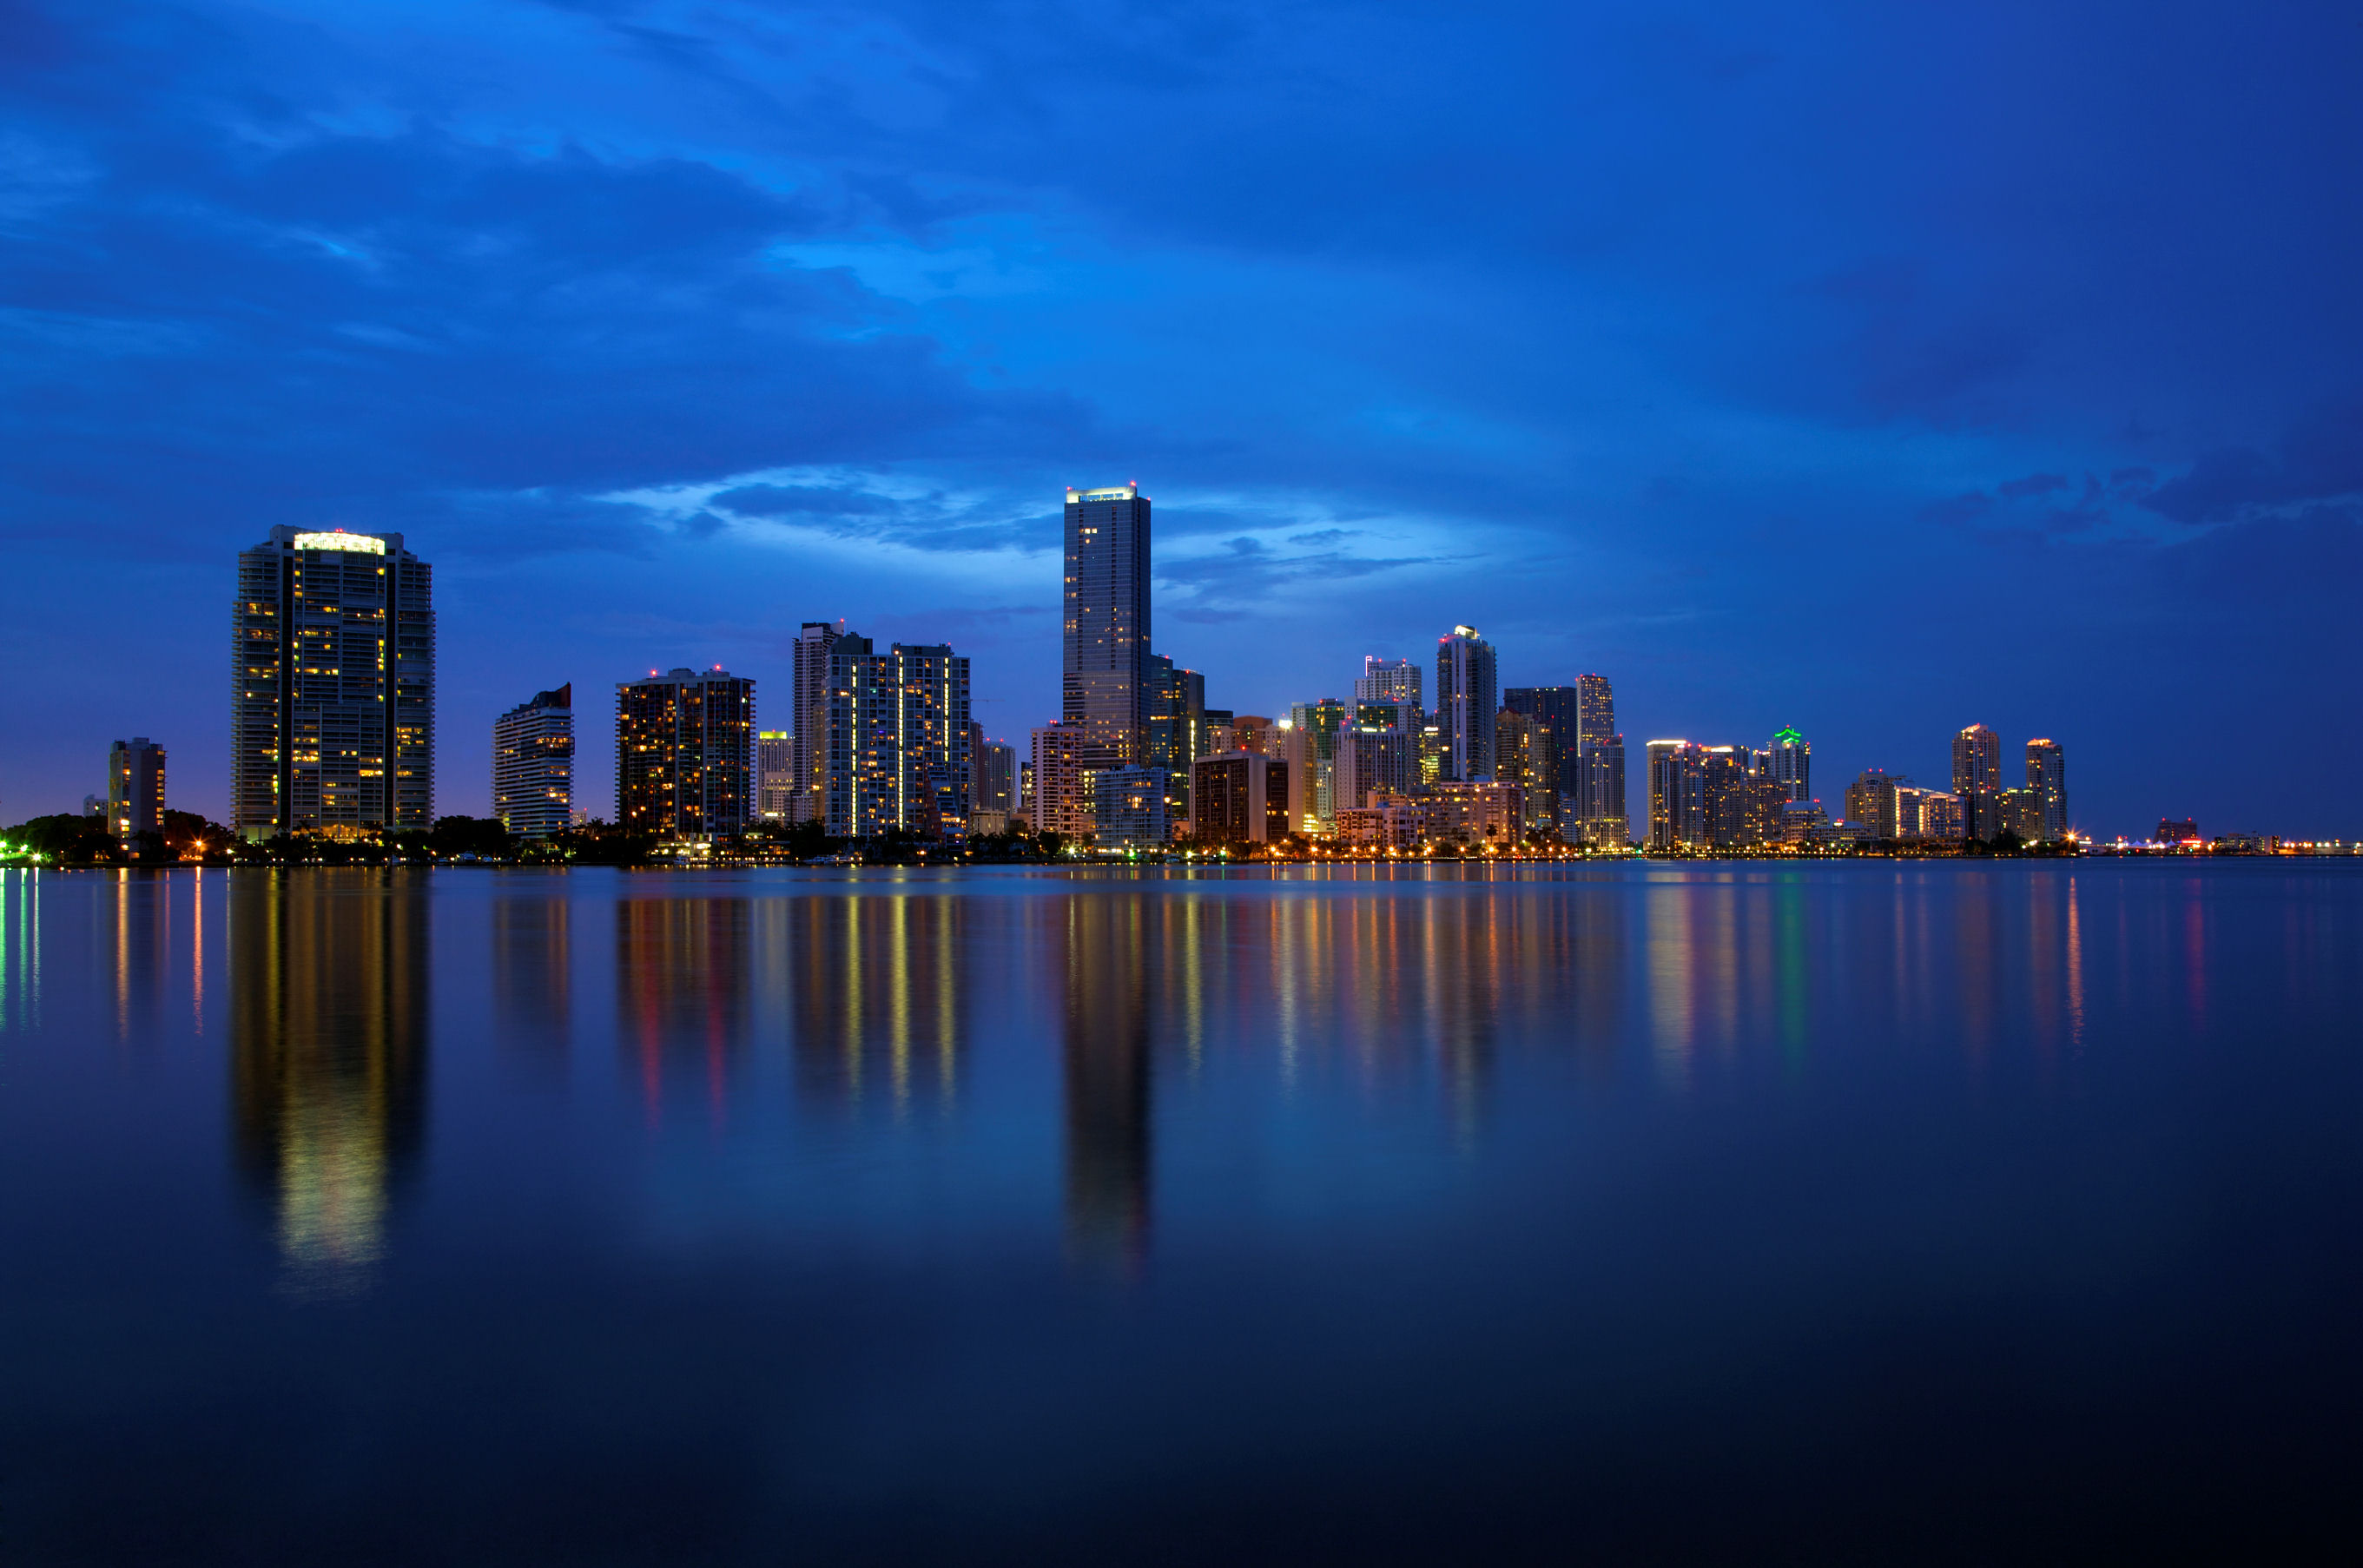 Miami Commercial Property News April 14, 2015 • Hawkins Commercial Realty